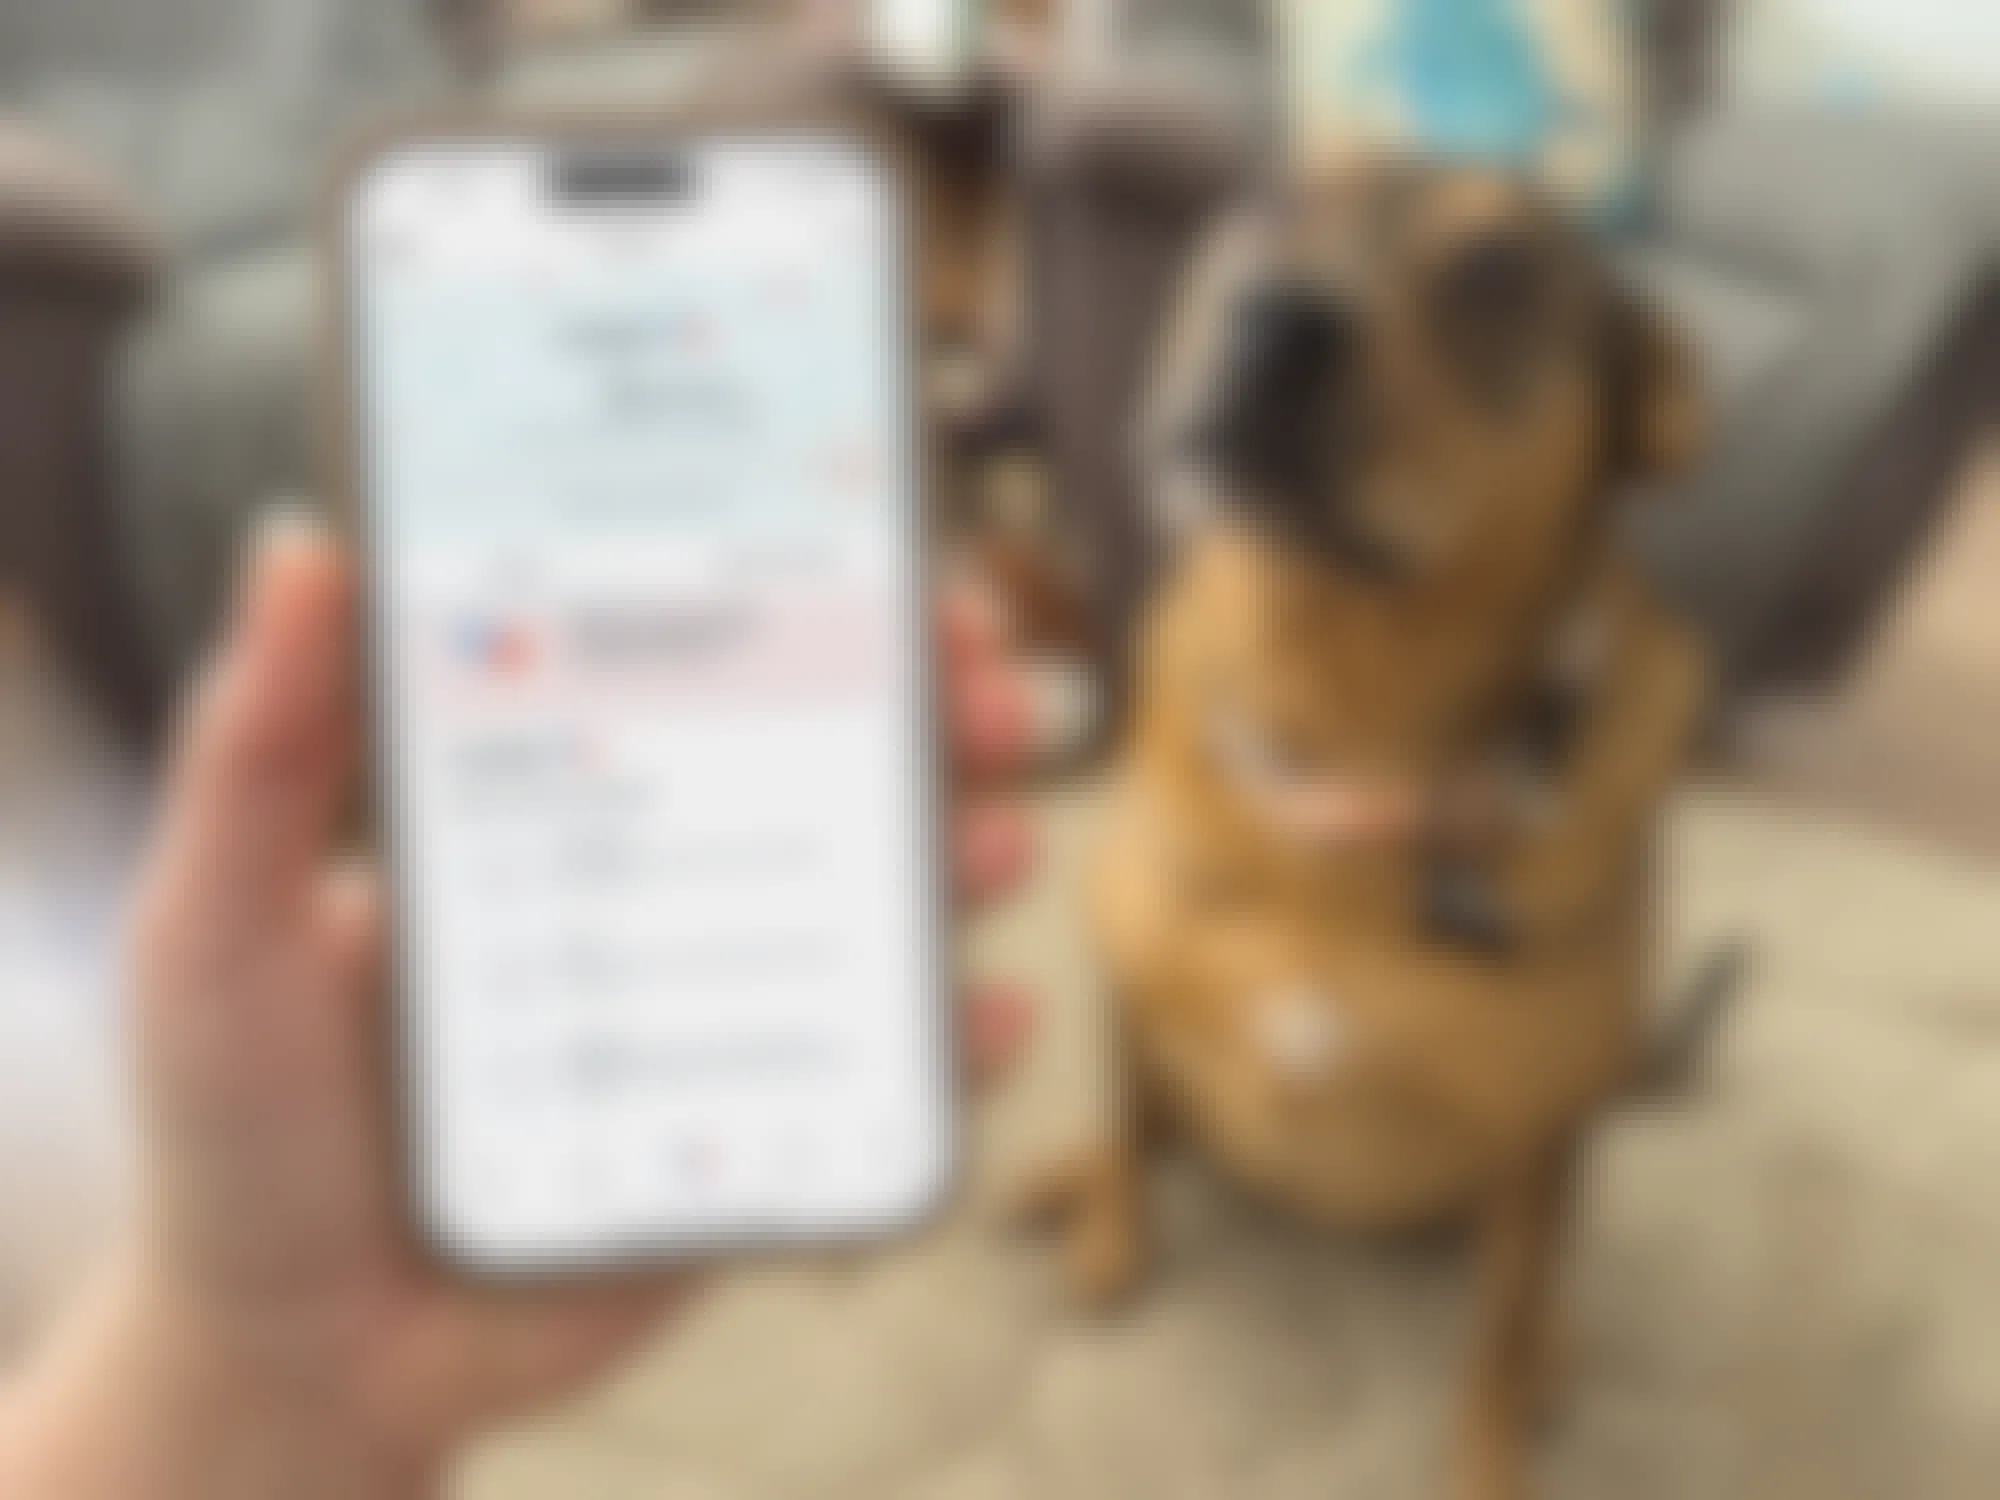 Someone holding a phone displaying the Treats rewards page on the Petsmart app